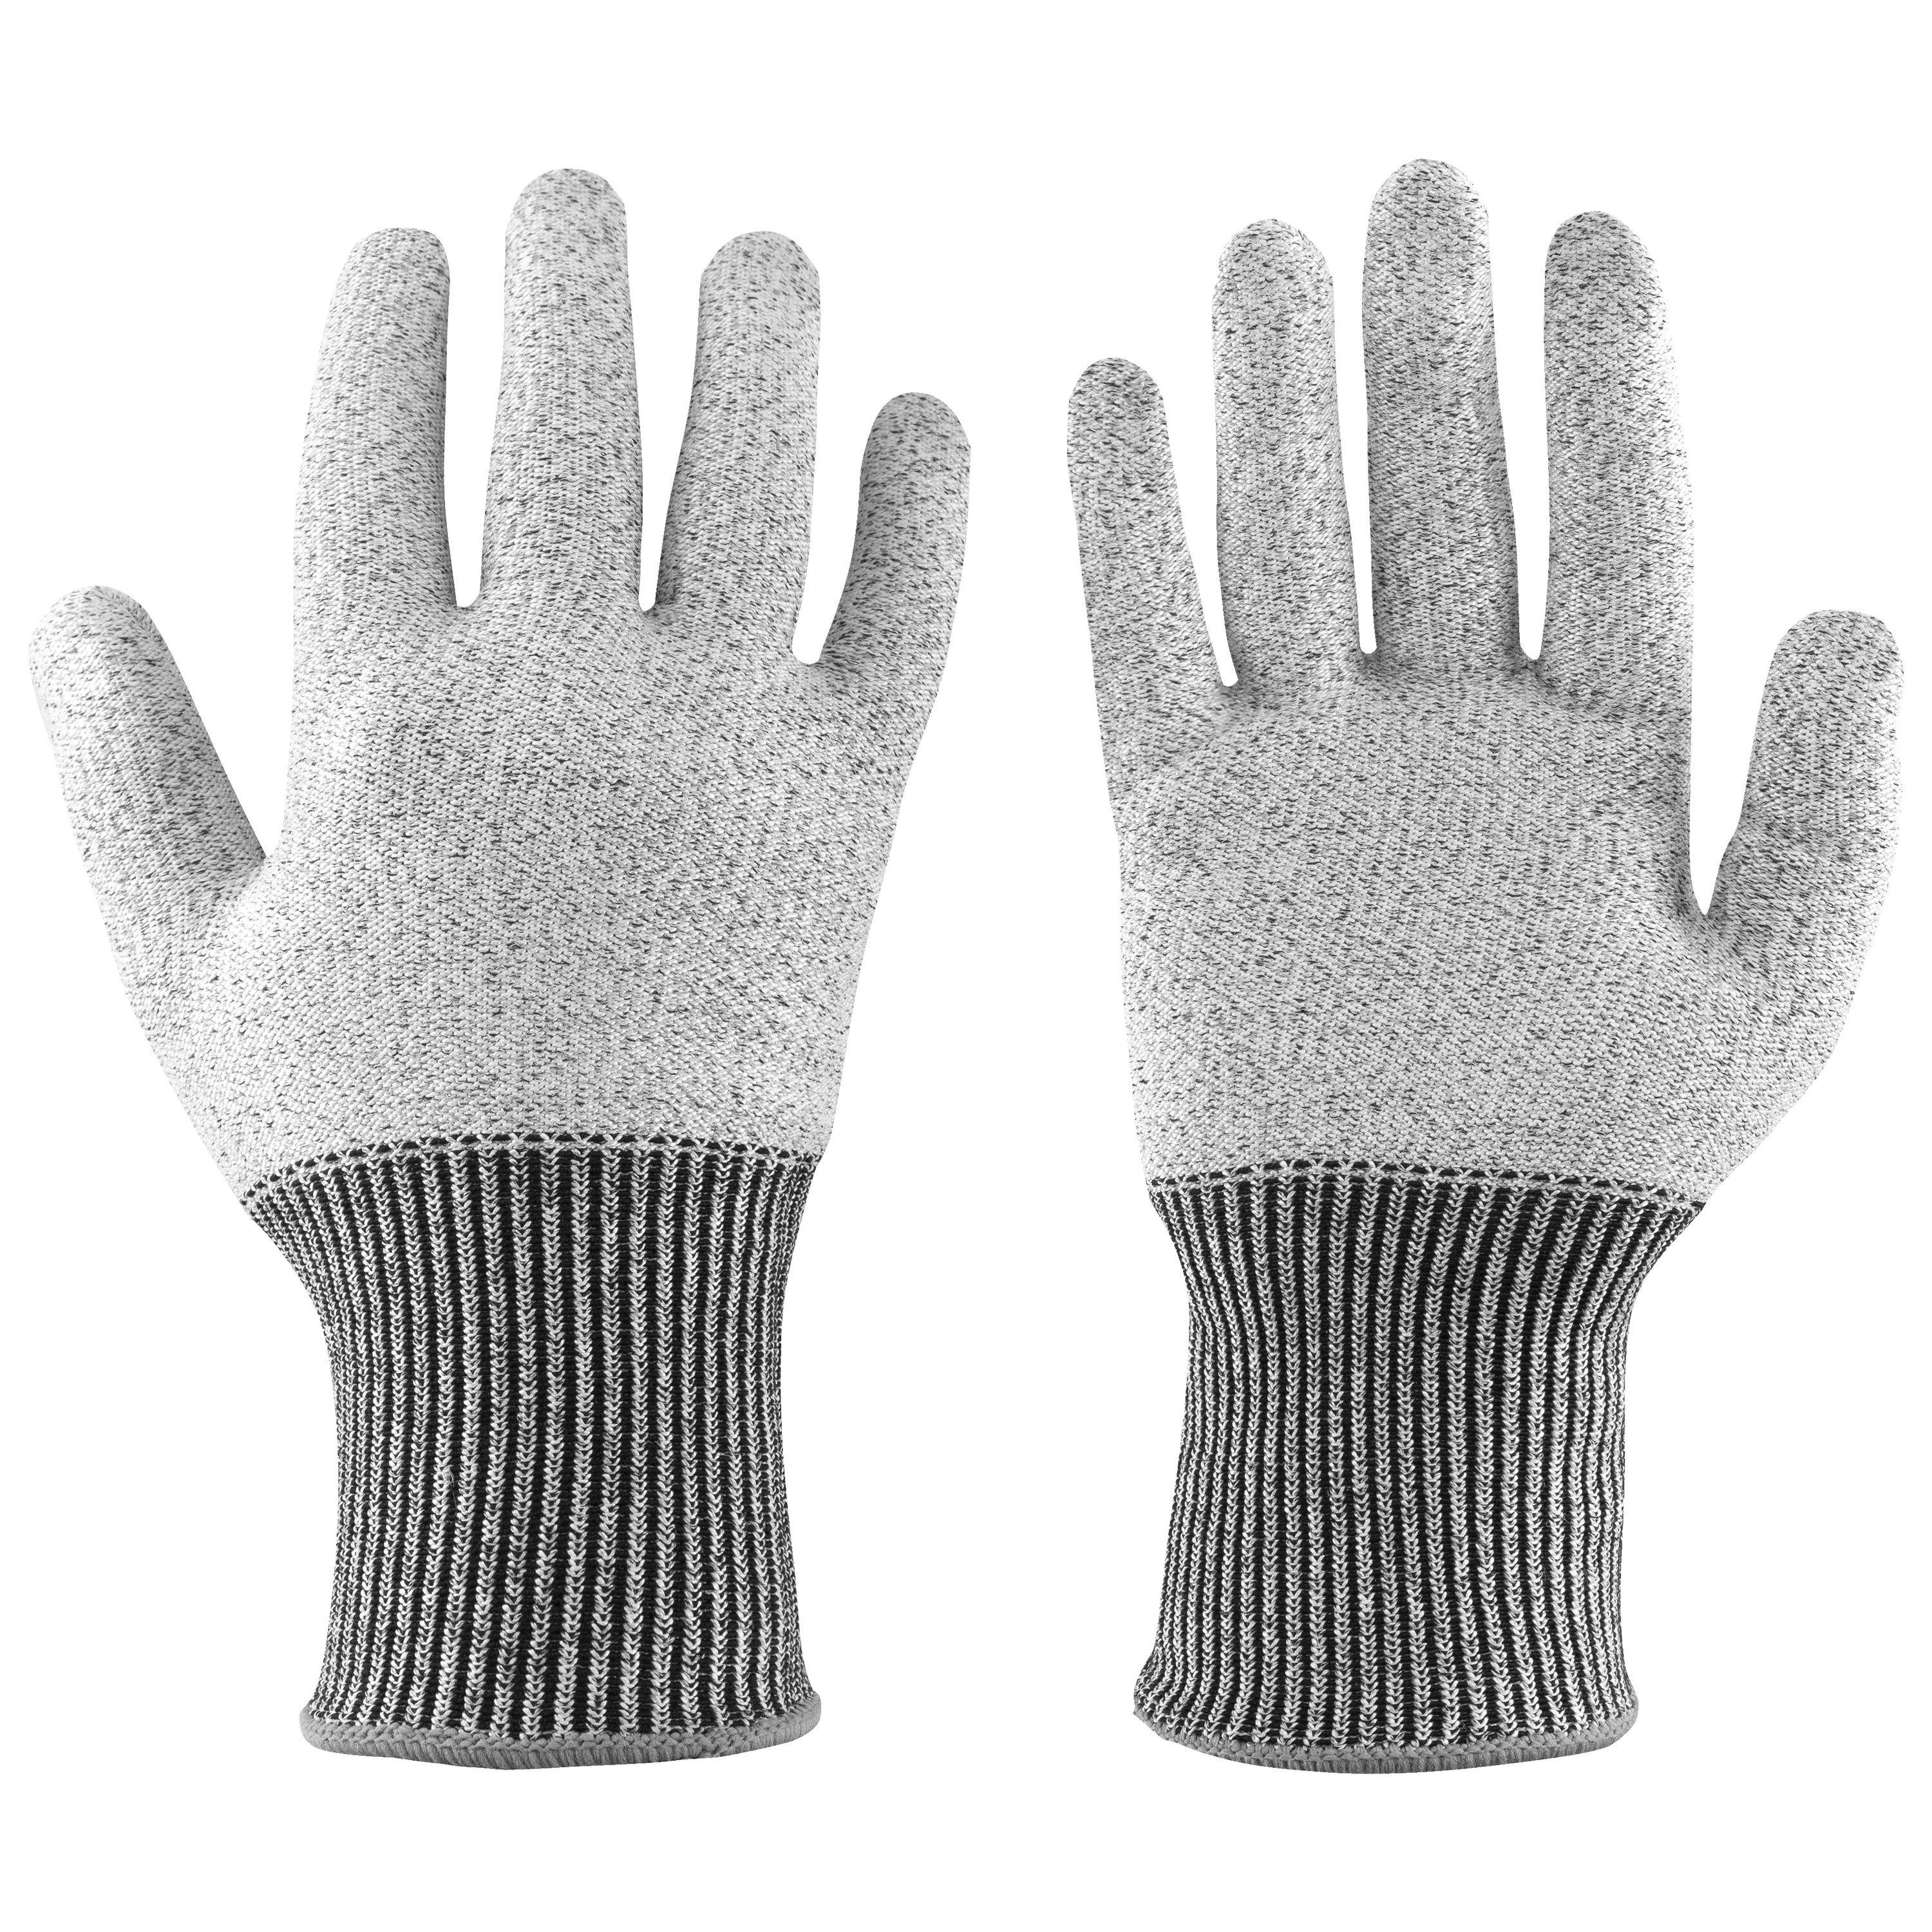 Cut Resistant Stainless Steel Mesh Knife Protective Glove+White Glove Set